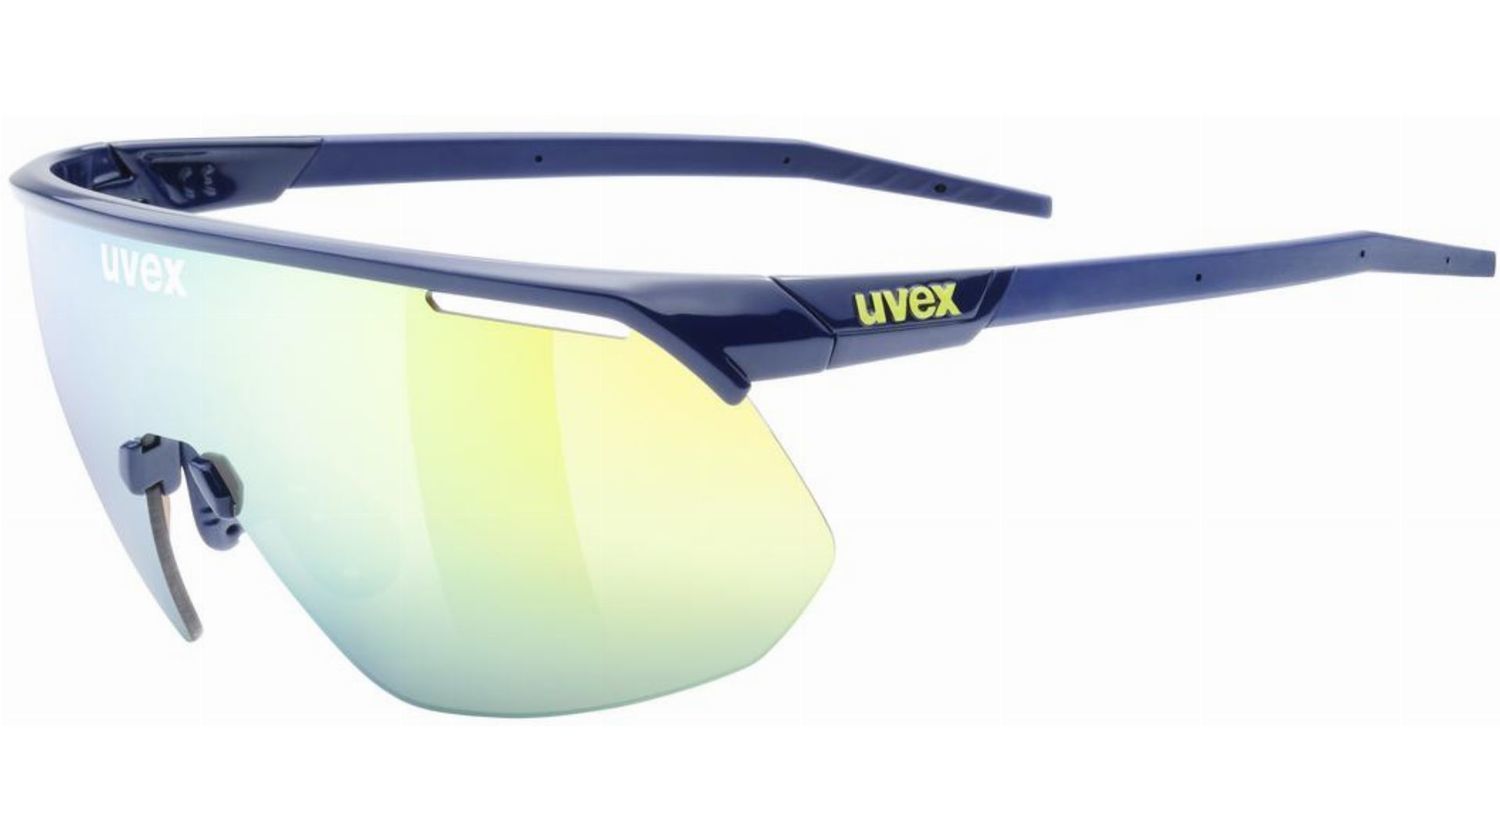 Uvex Pace One Sportbrille blue/mirror yellow